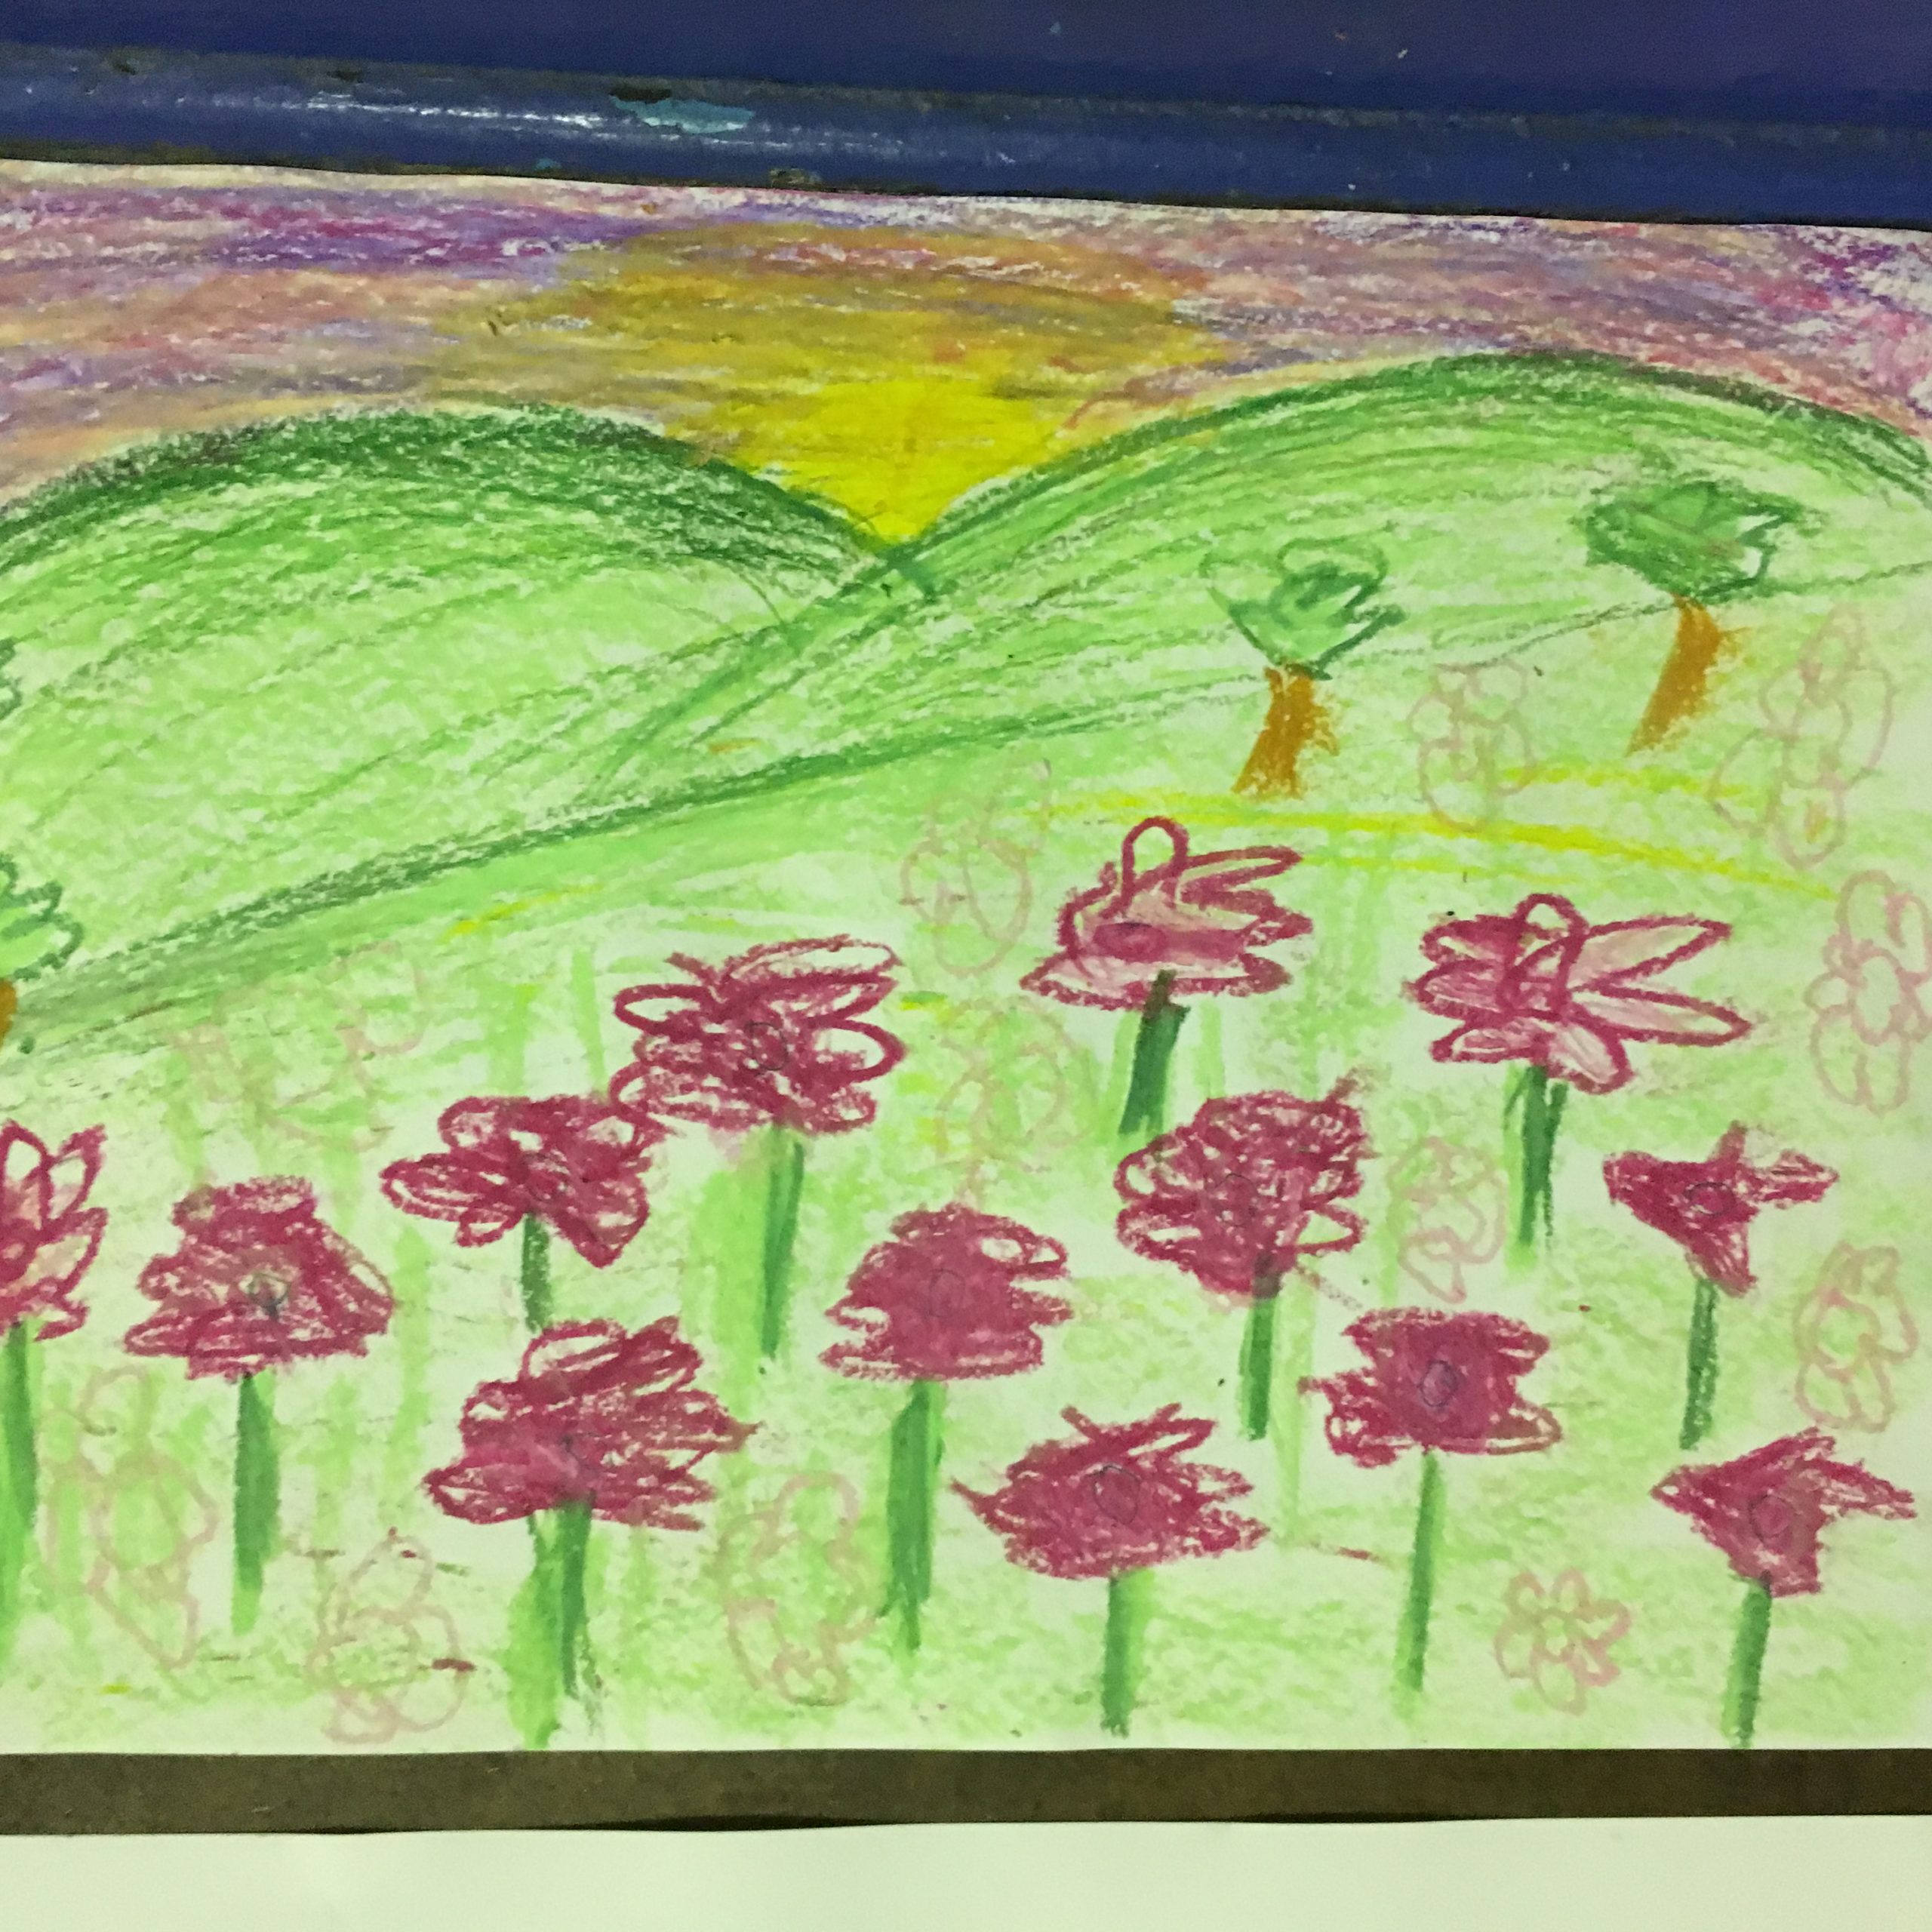 Colour sketch of flowers in foreground and green hills behind